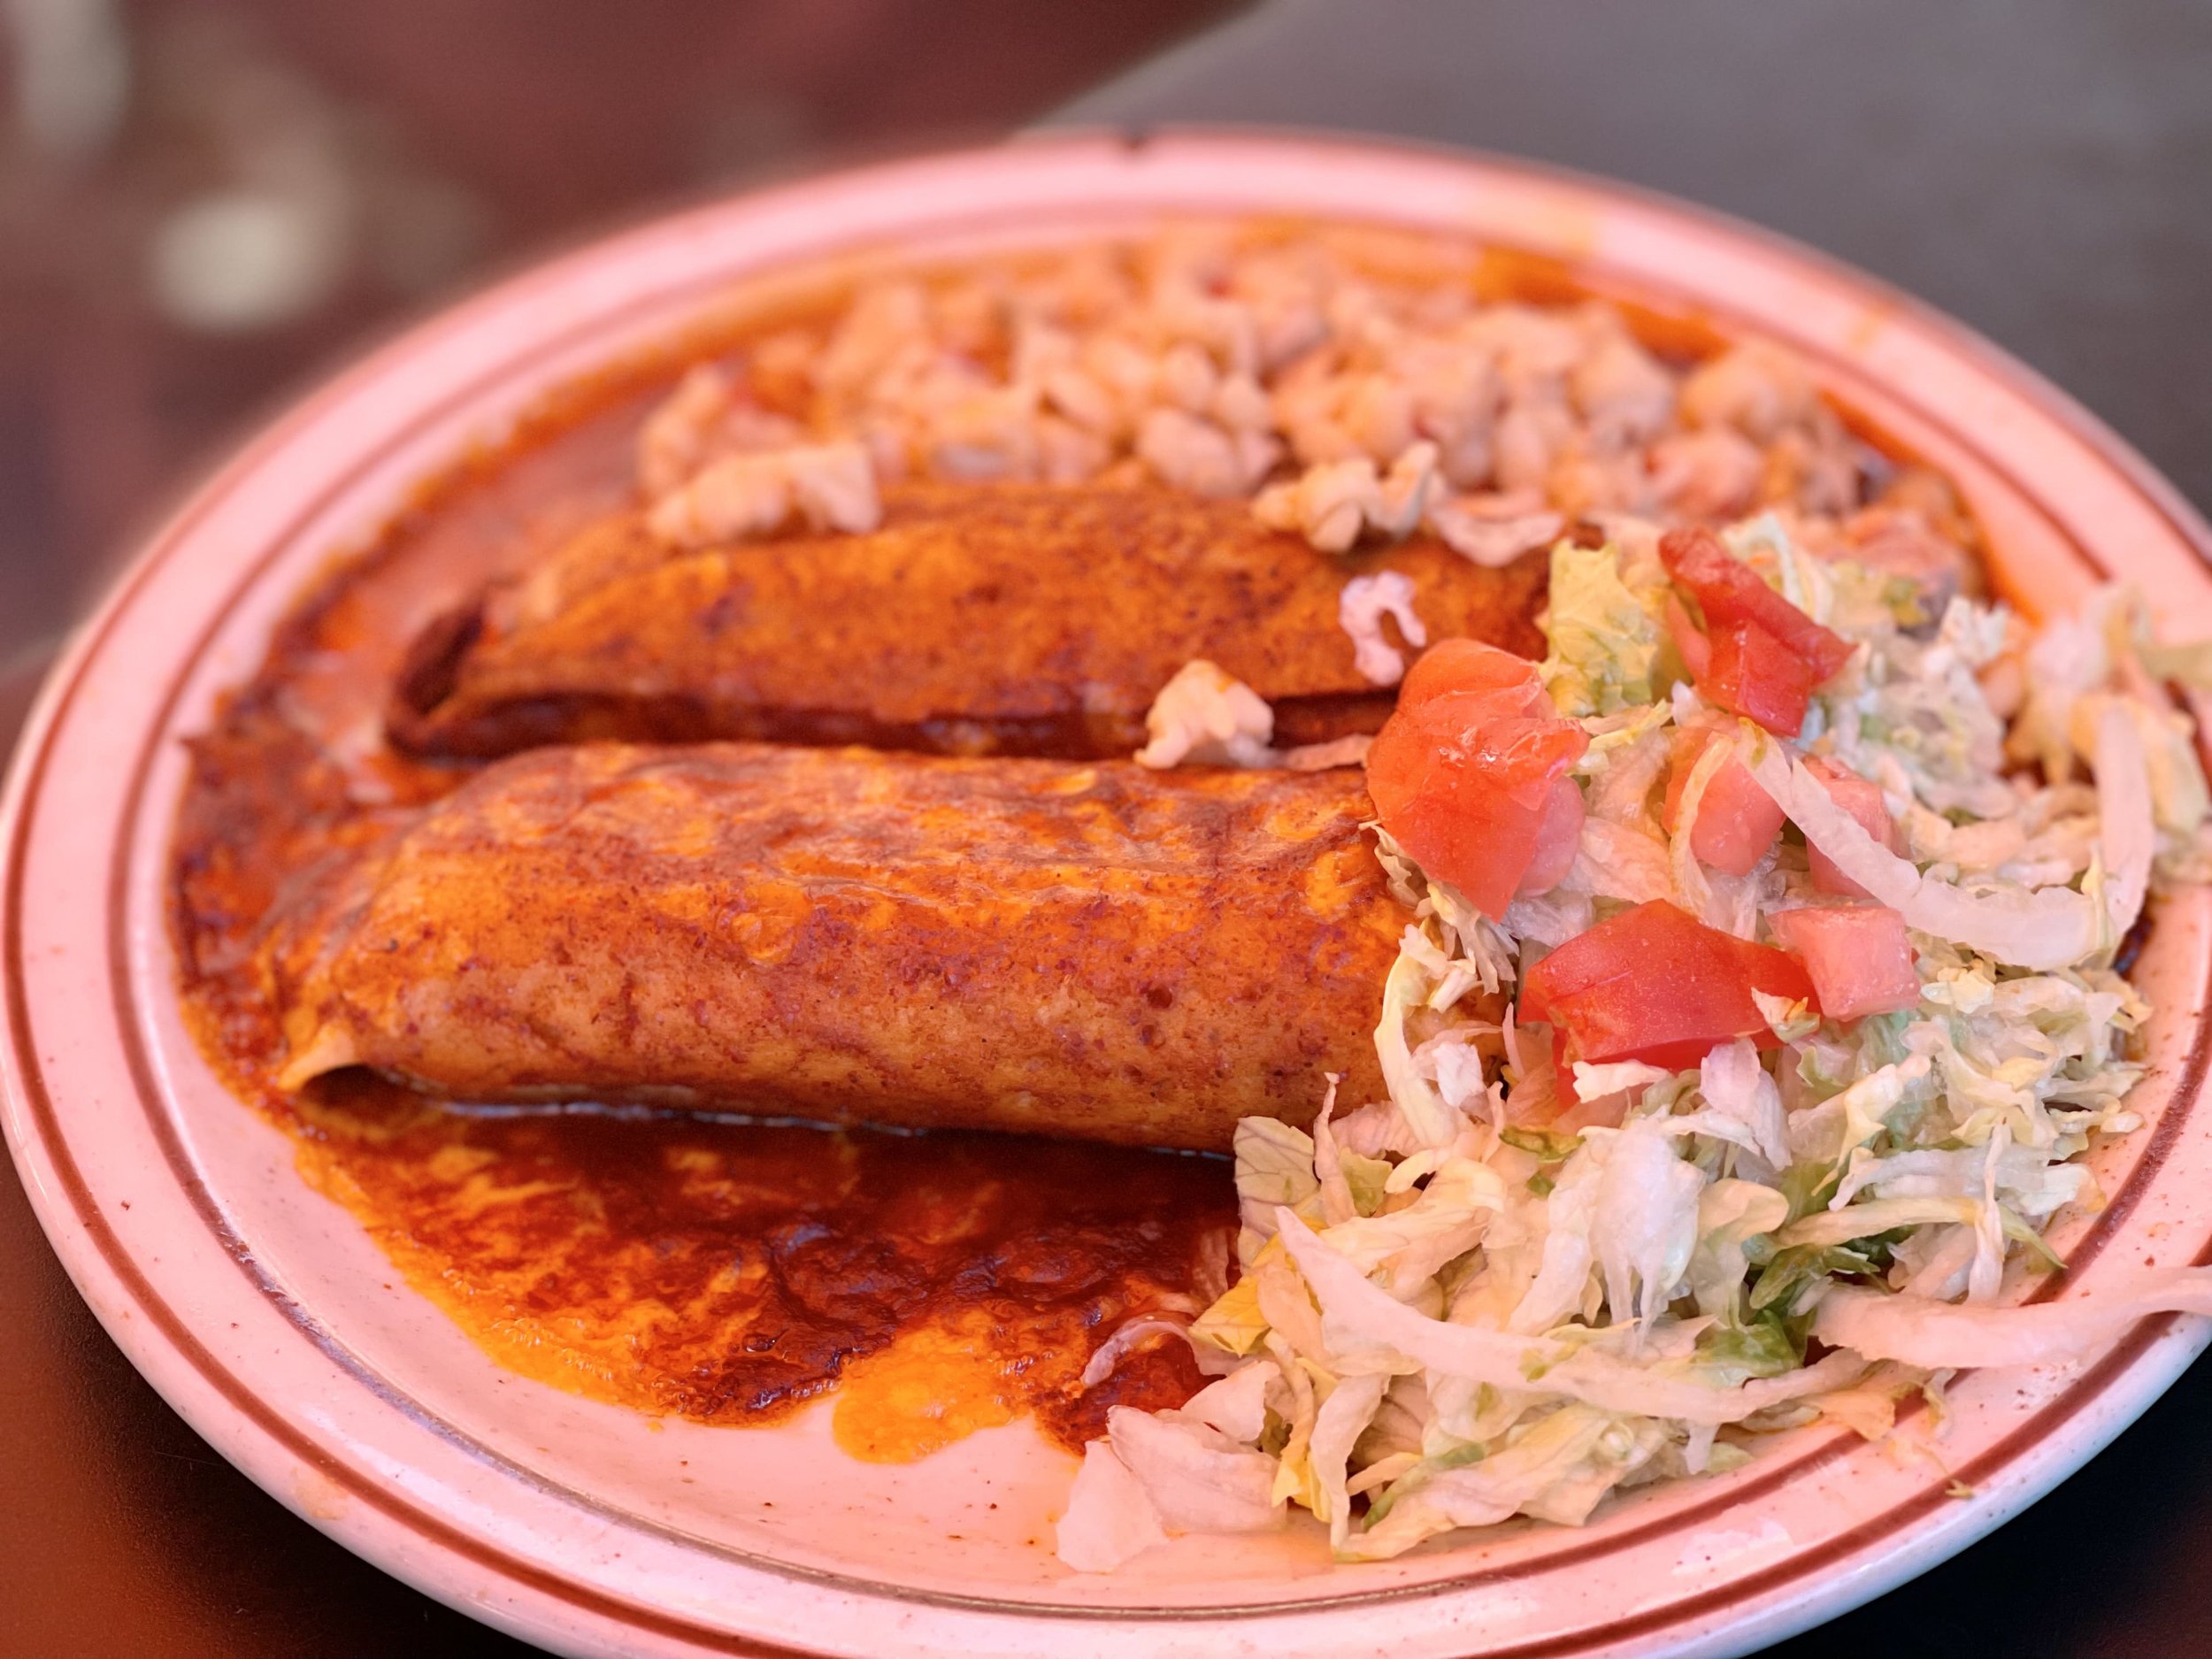 My favorite Tamales with Red Chile Sauce at a New Mexican restaurant in Santa Fe.